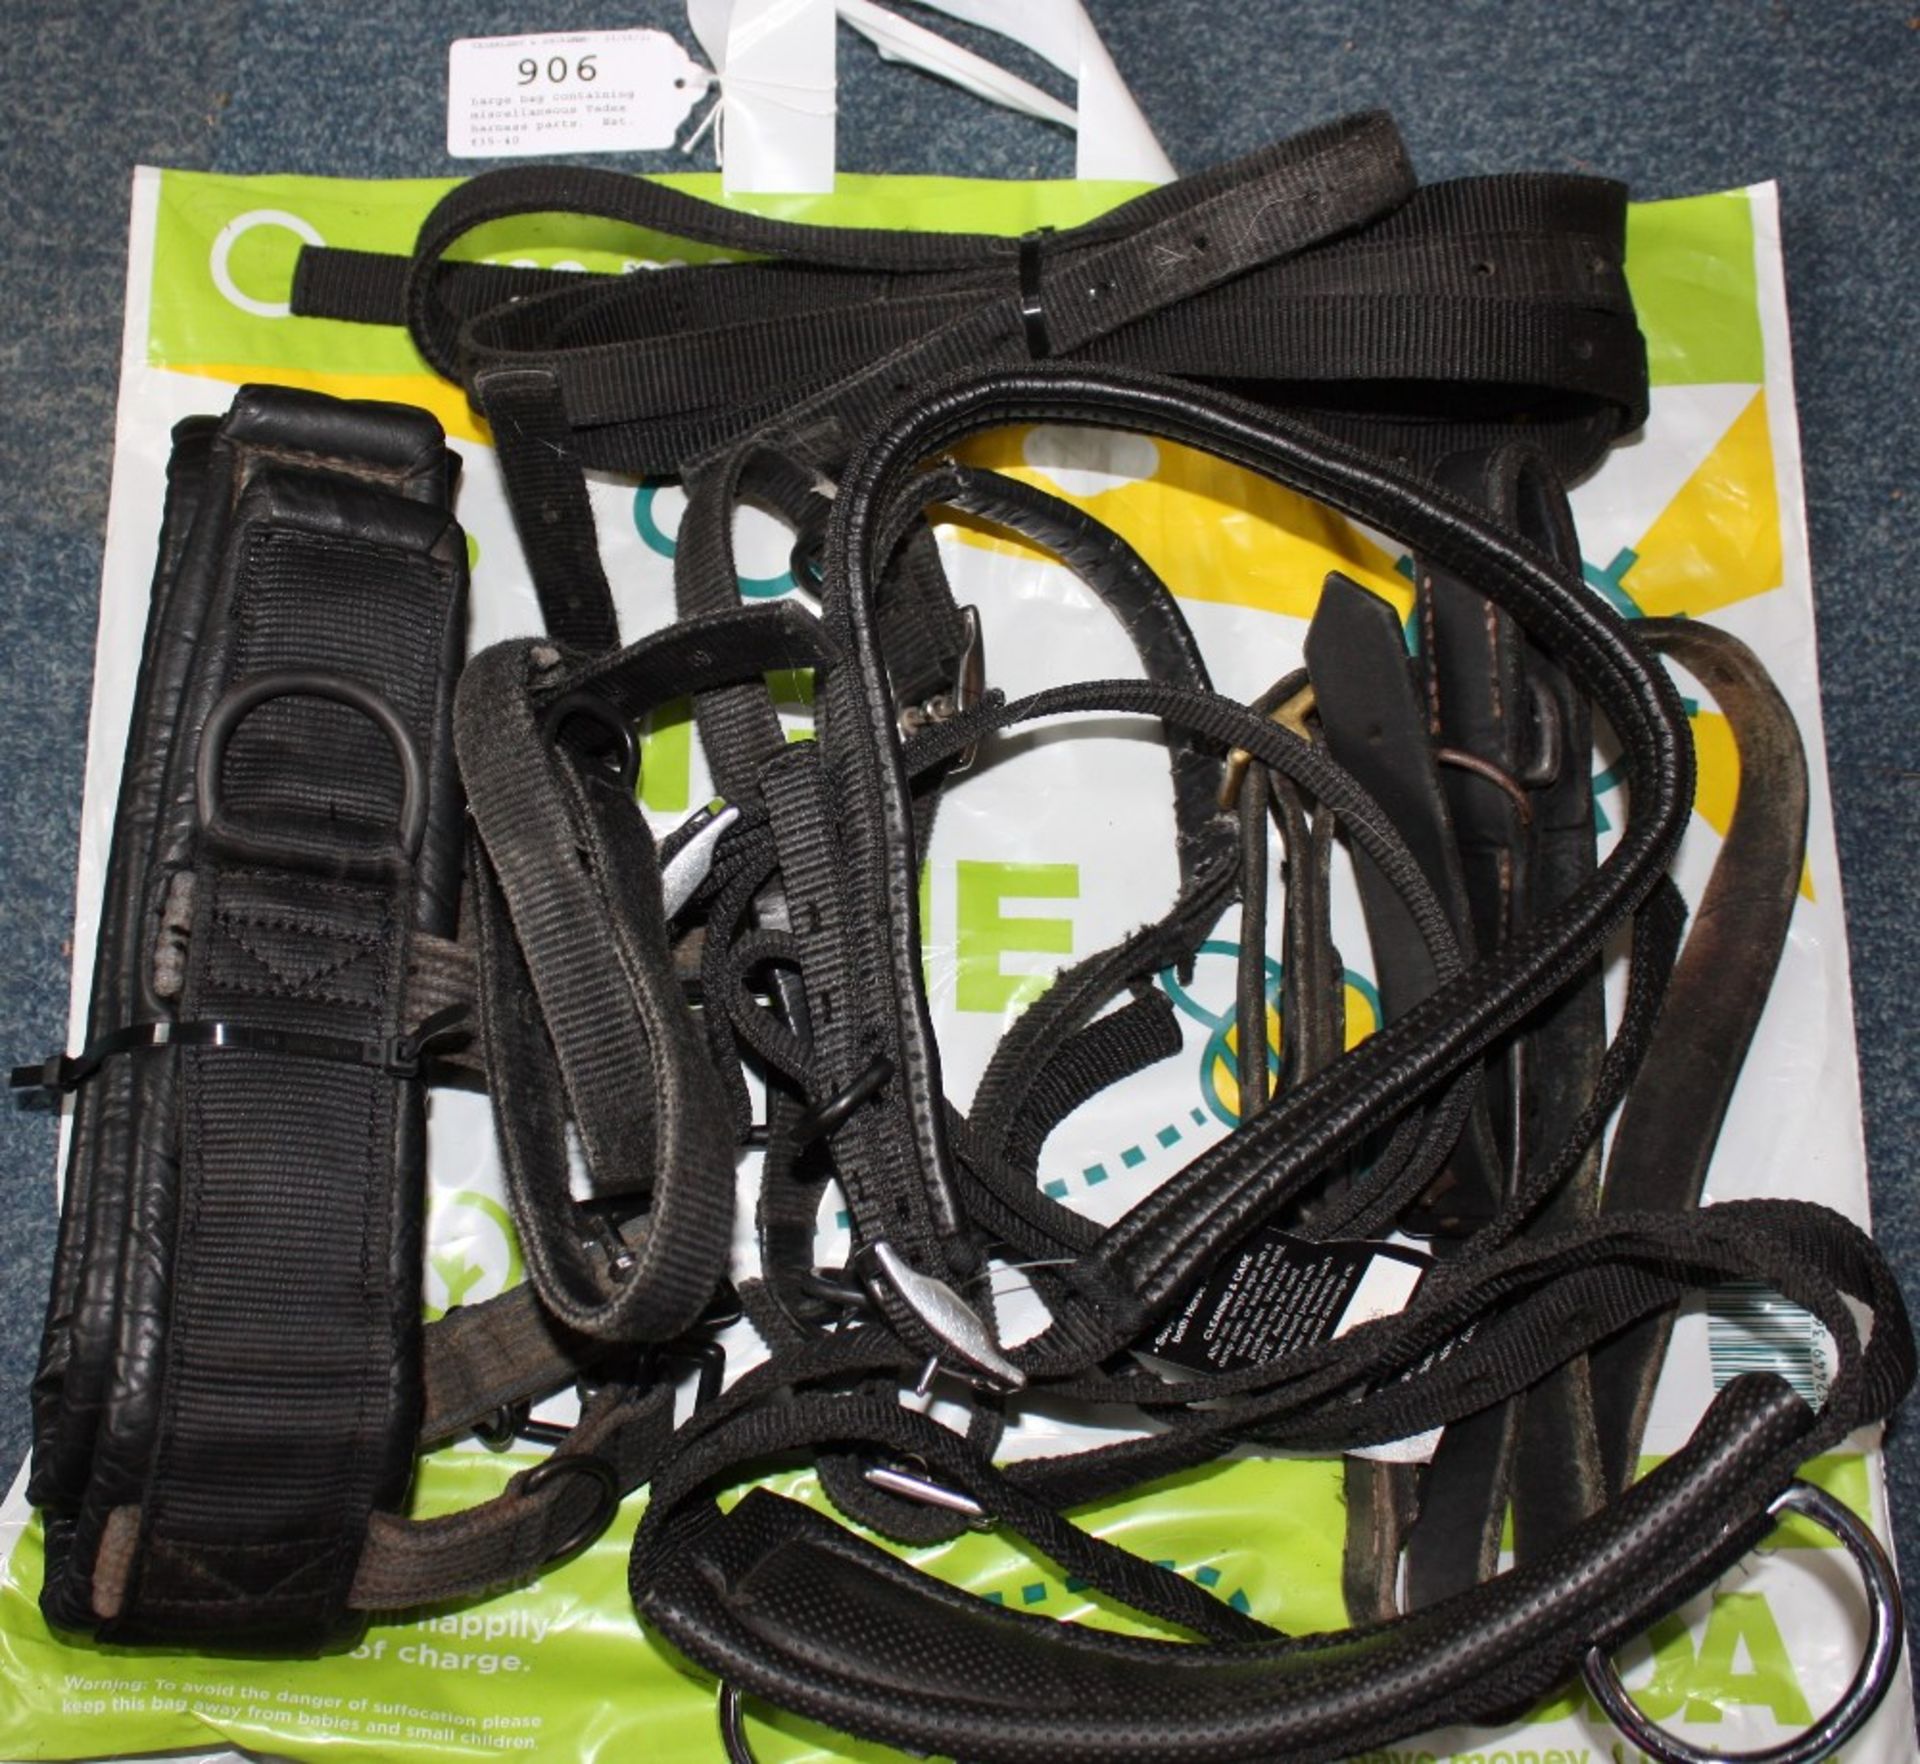 Large bag containing miscellaneous Tedex harness parts.